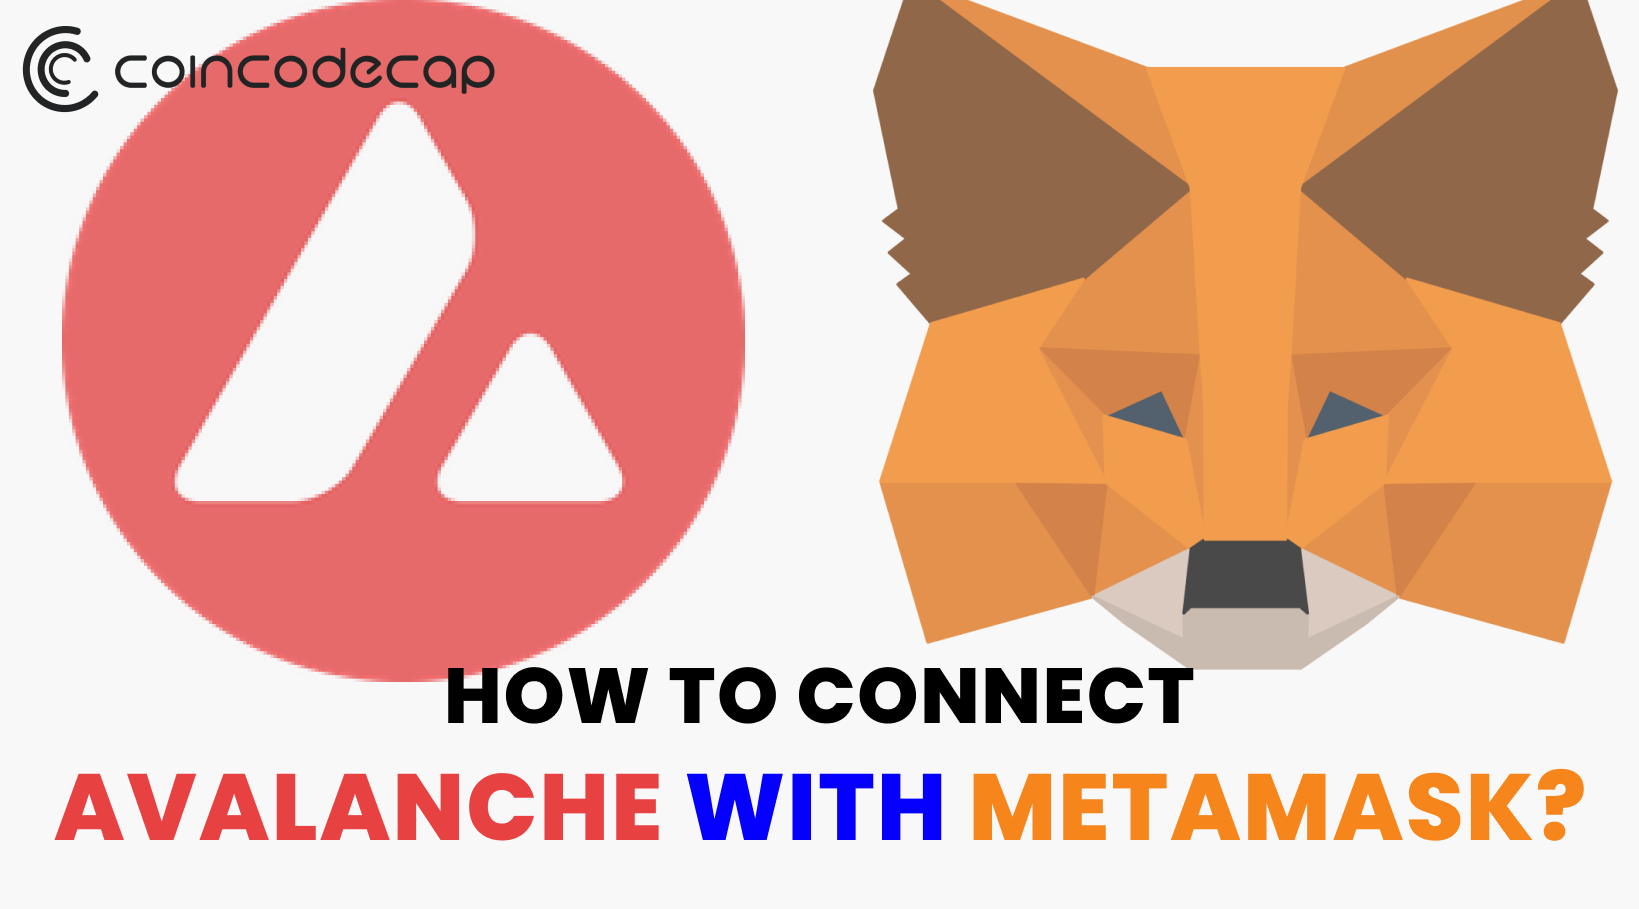 How To Connect Avalanche With Metamask?